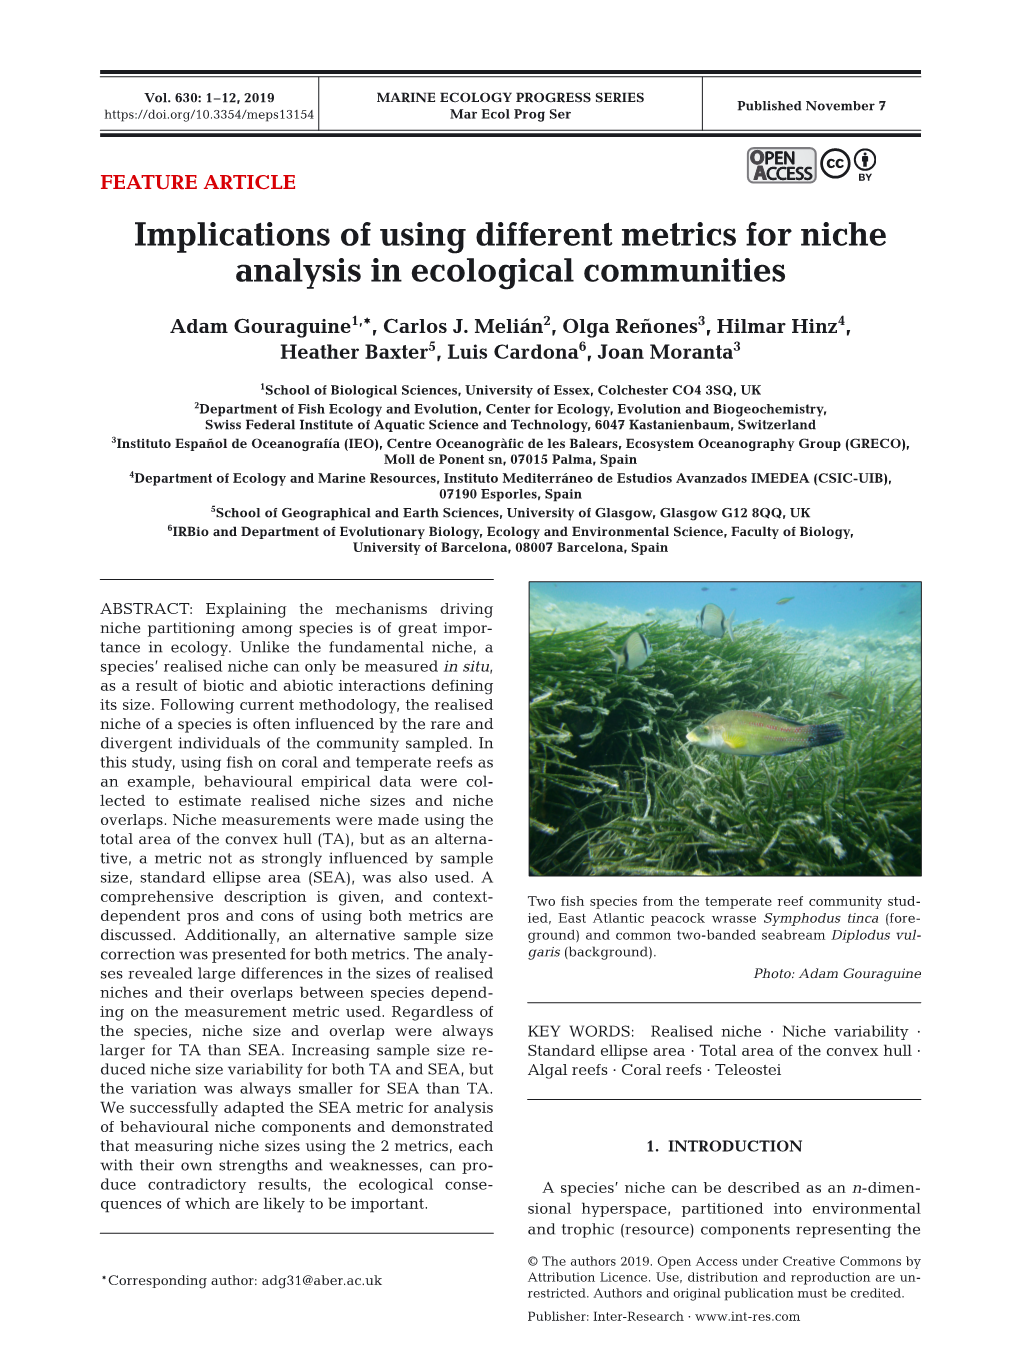 Implications of Using Different Metrics for Niche Analysis in Ecological Communities